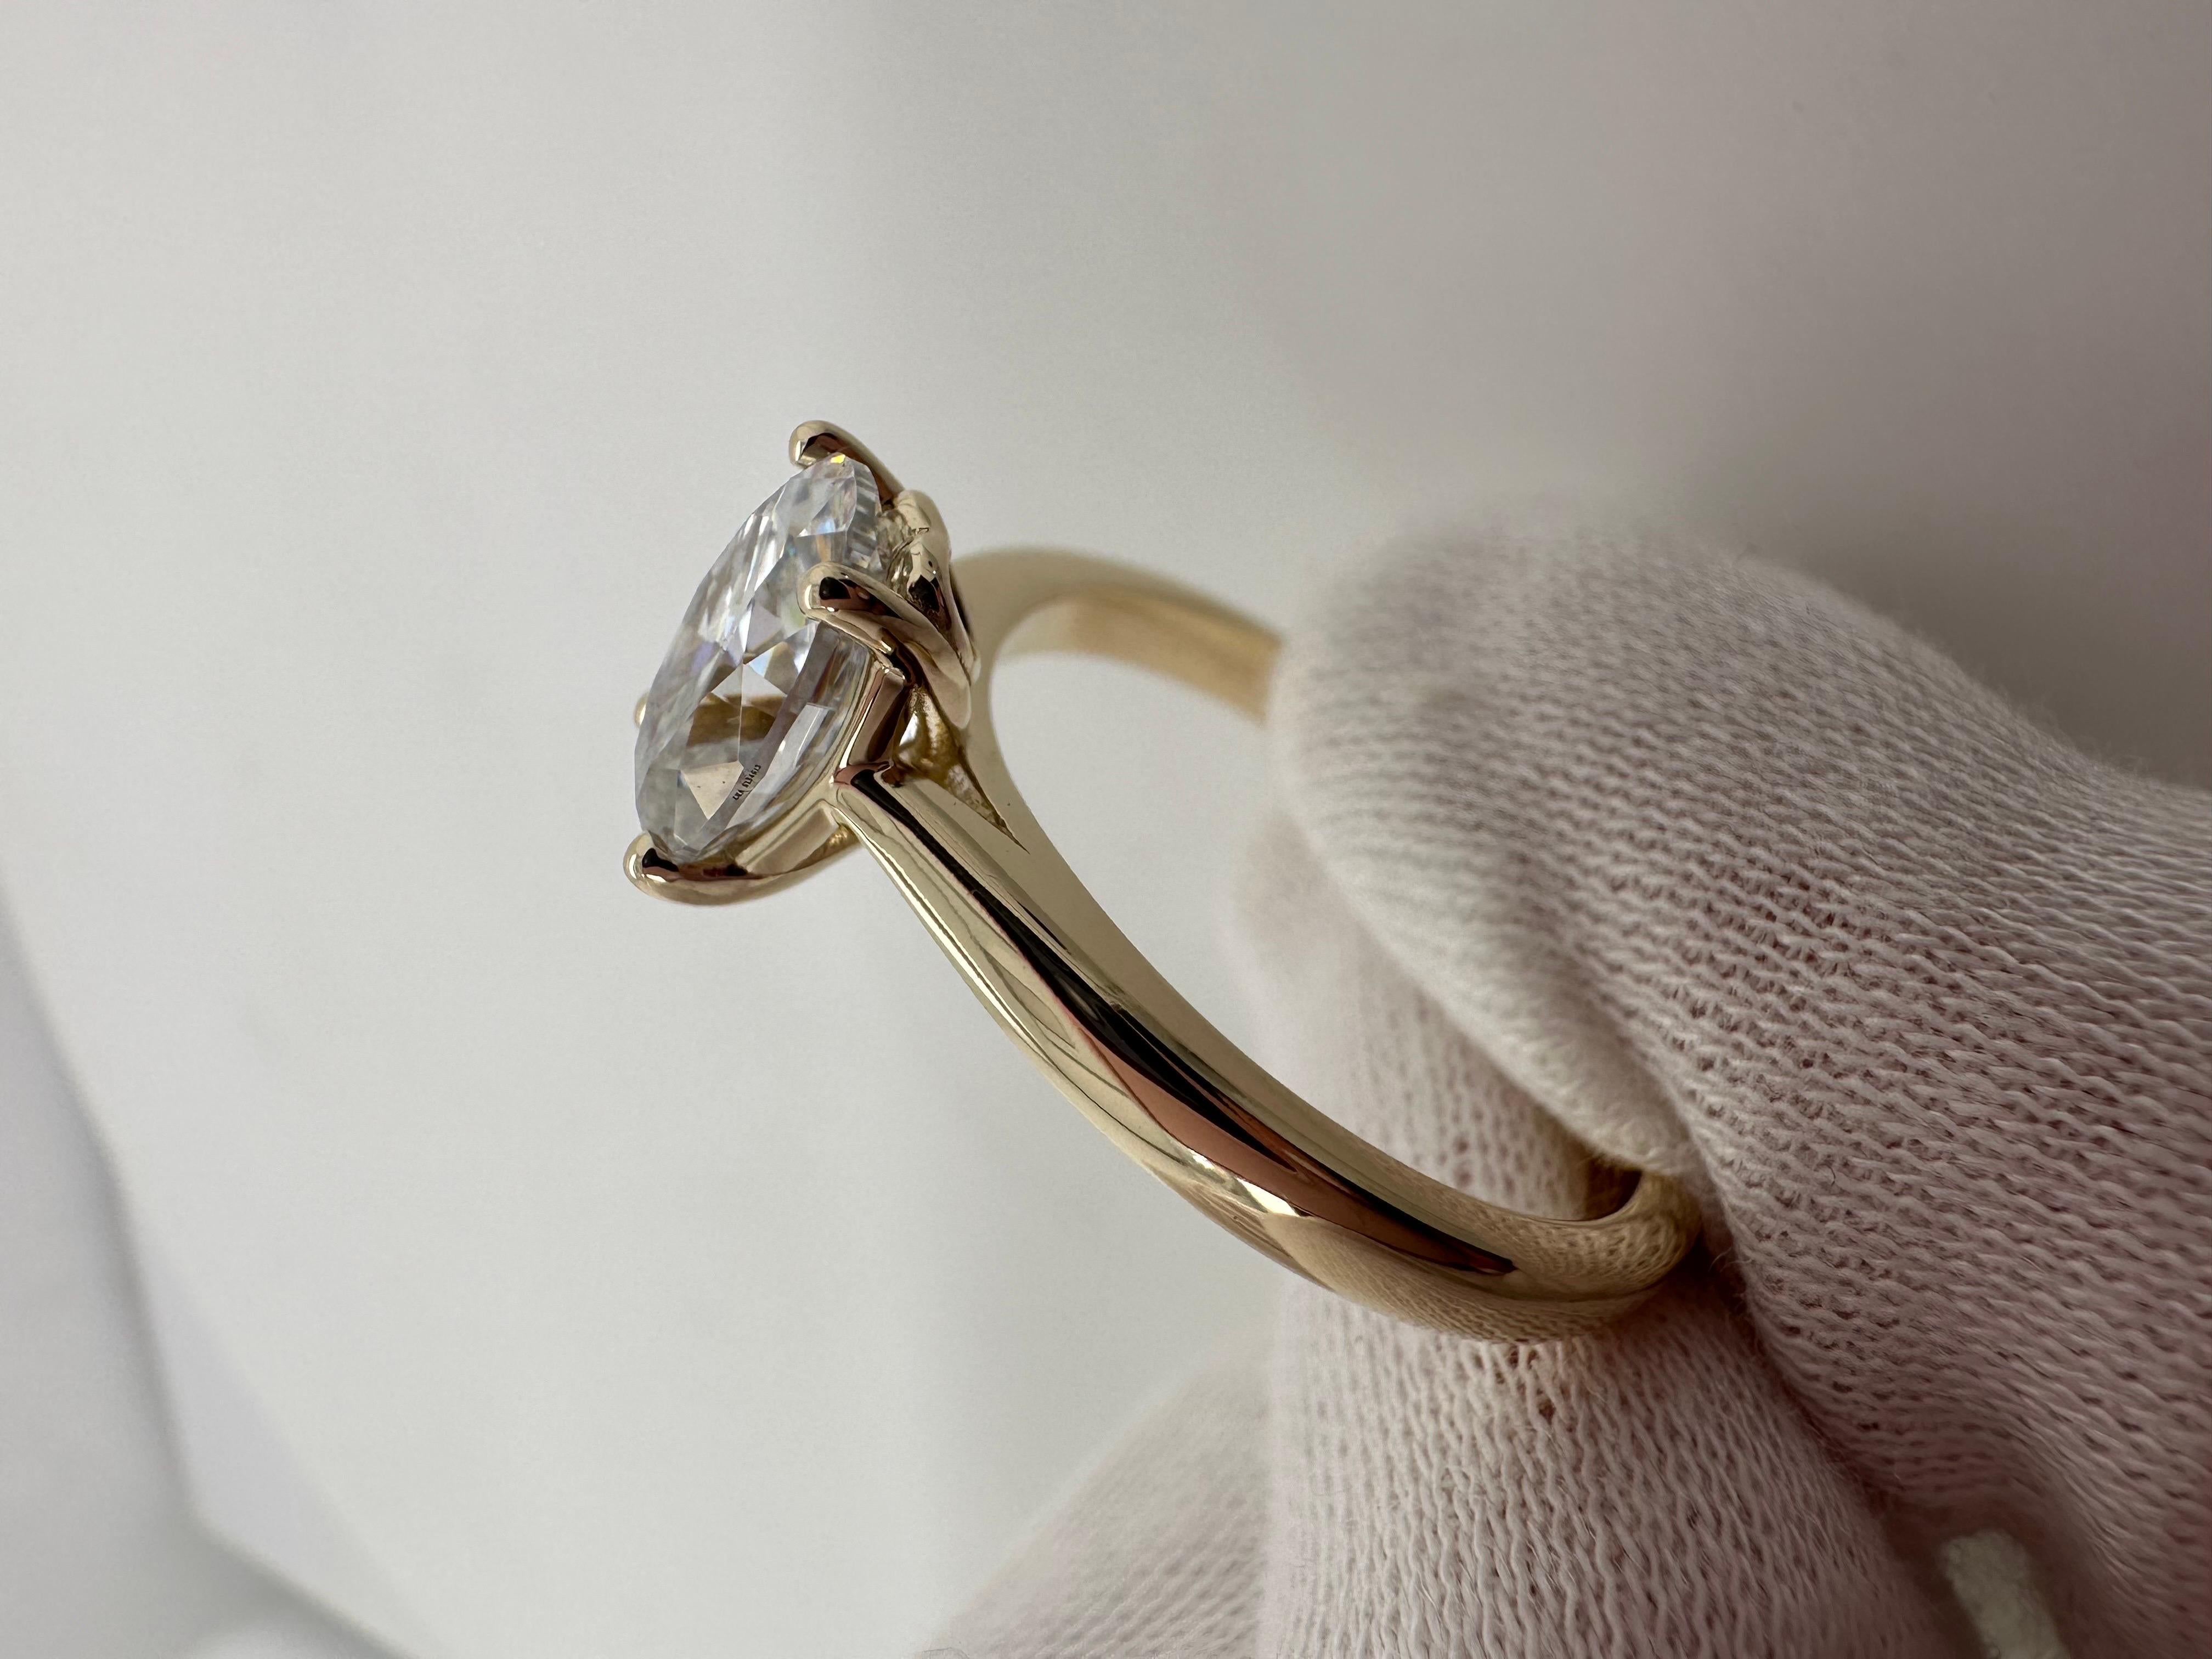 2ct oval moissanite certified VVS1 clarity and F color, made in 14KT yellow gold, simple elegant ring with a small heart on the setting.Handling time 6-7 days to get a certificate of authenticity in your name.

Certificate of authenticity comes with